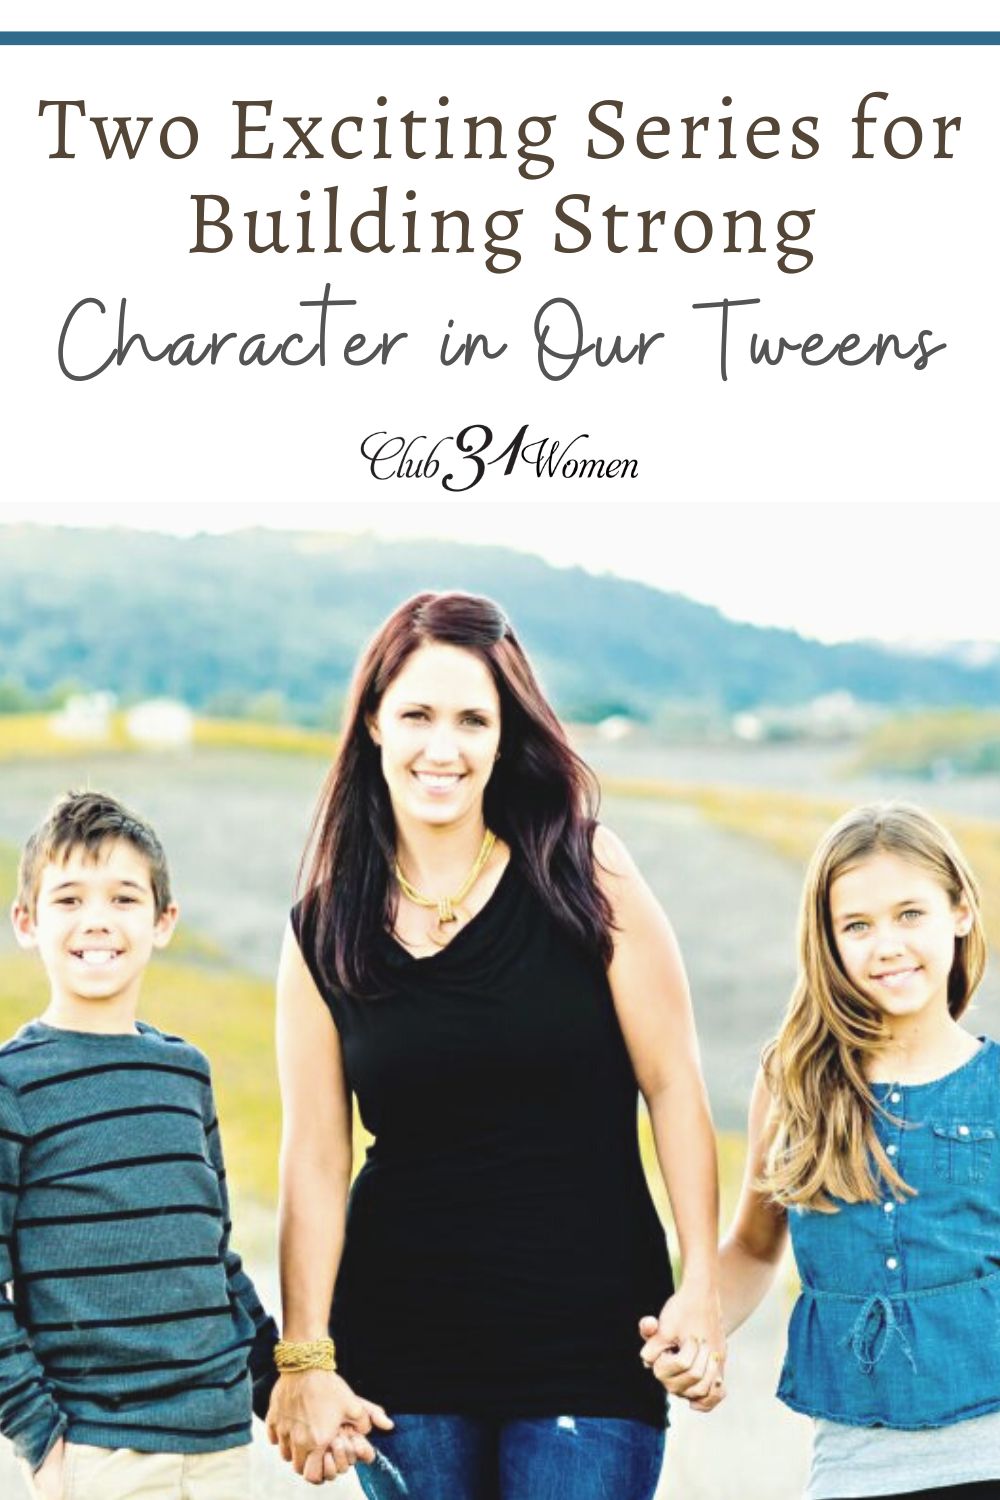 Looking for a character-building resource for your tweens? Here's one of my favorites for encouraging, inspiring, and entertaining those tween-age kids! via @Club31Women